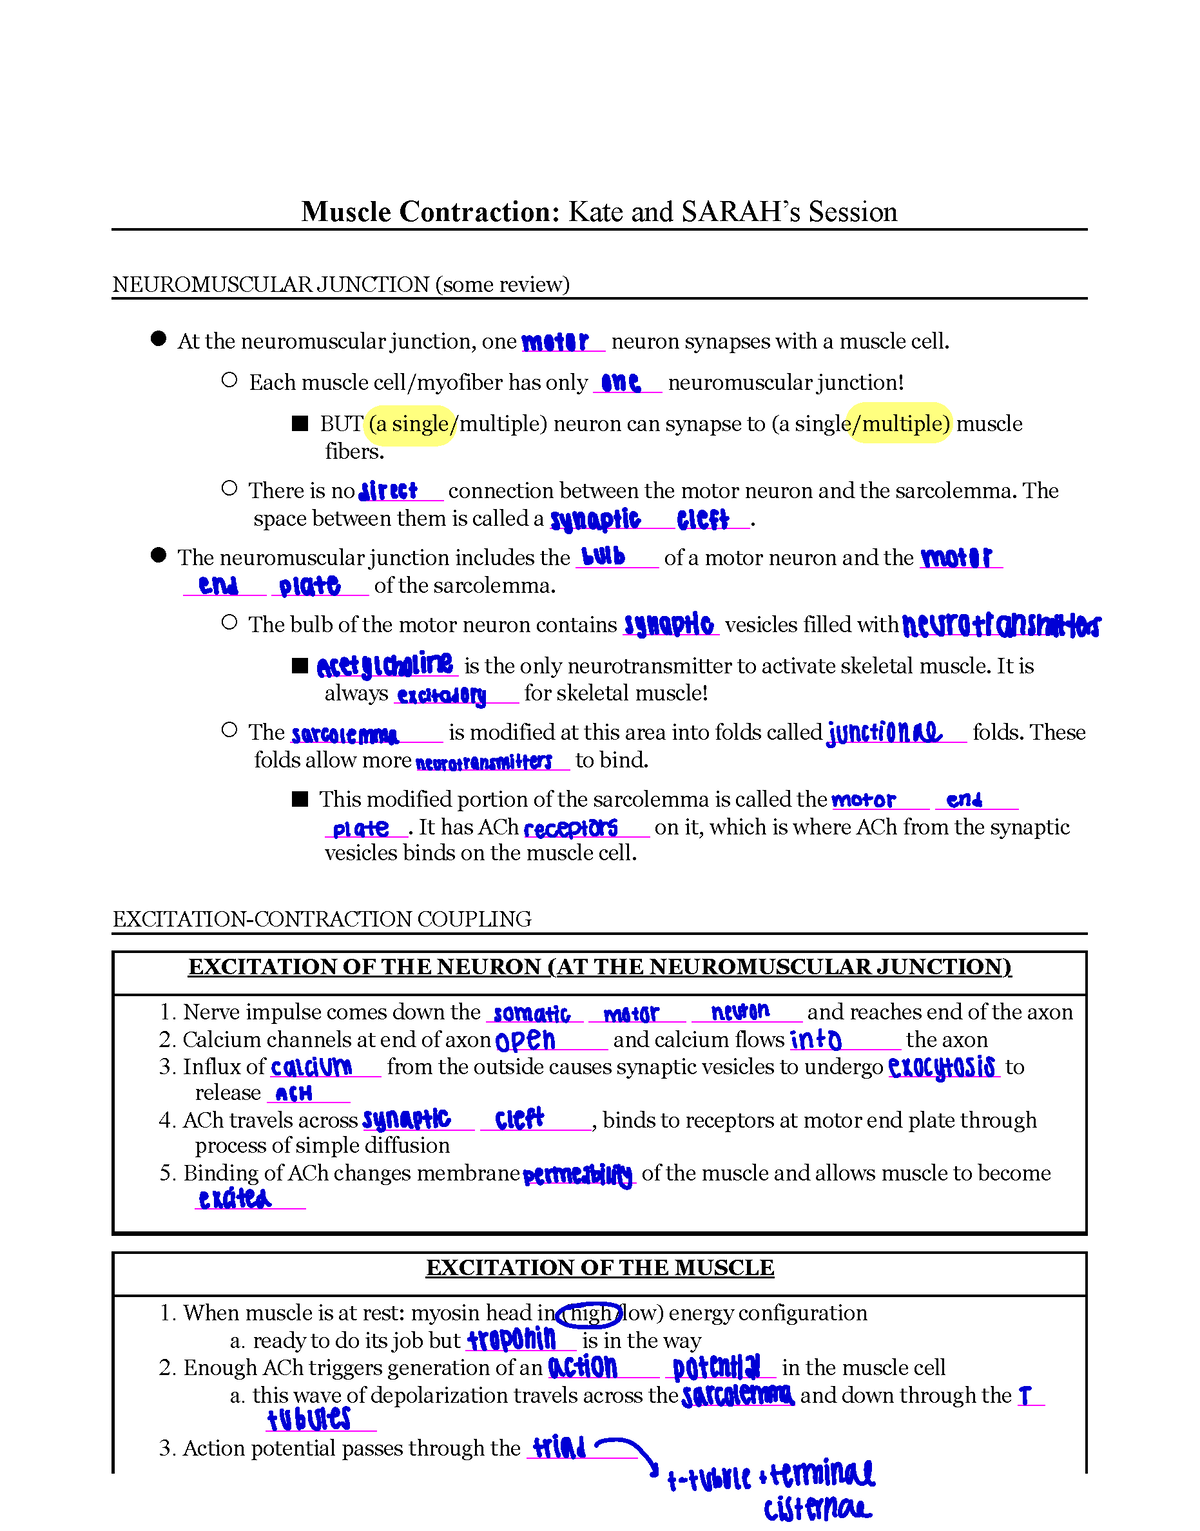 muscle-contraction-worksheet-muscle-contraction-kate-and-sarah-s